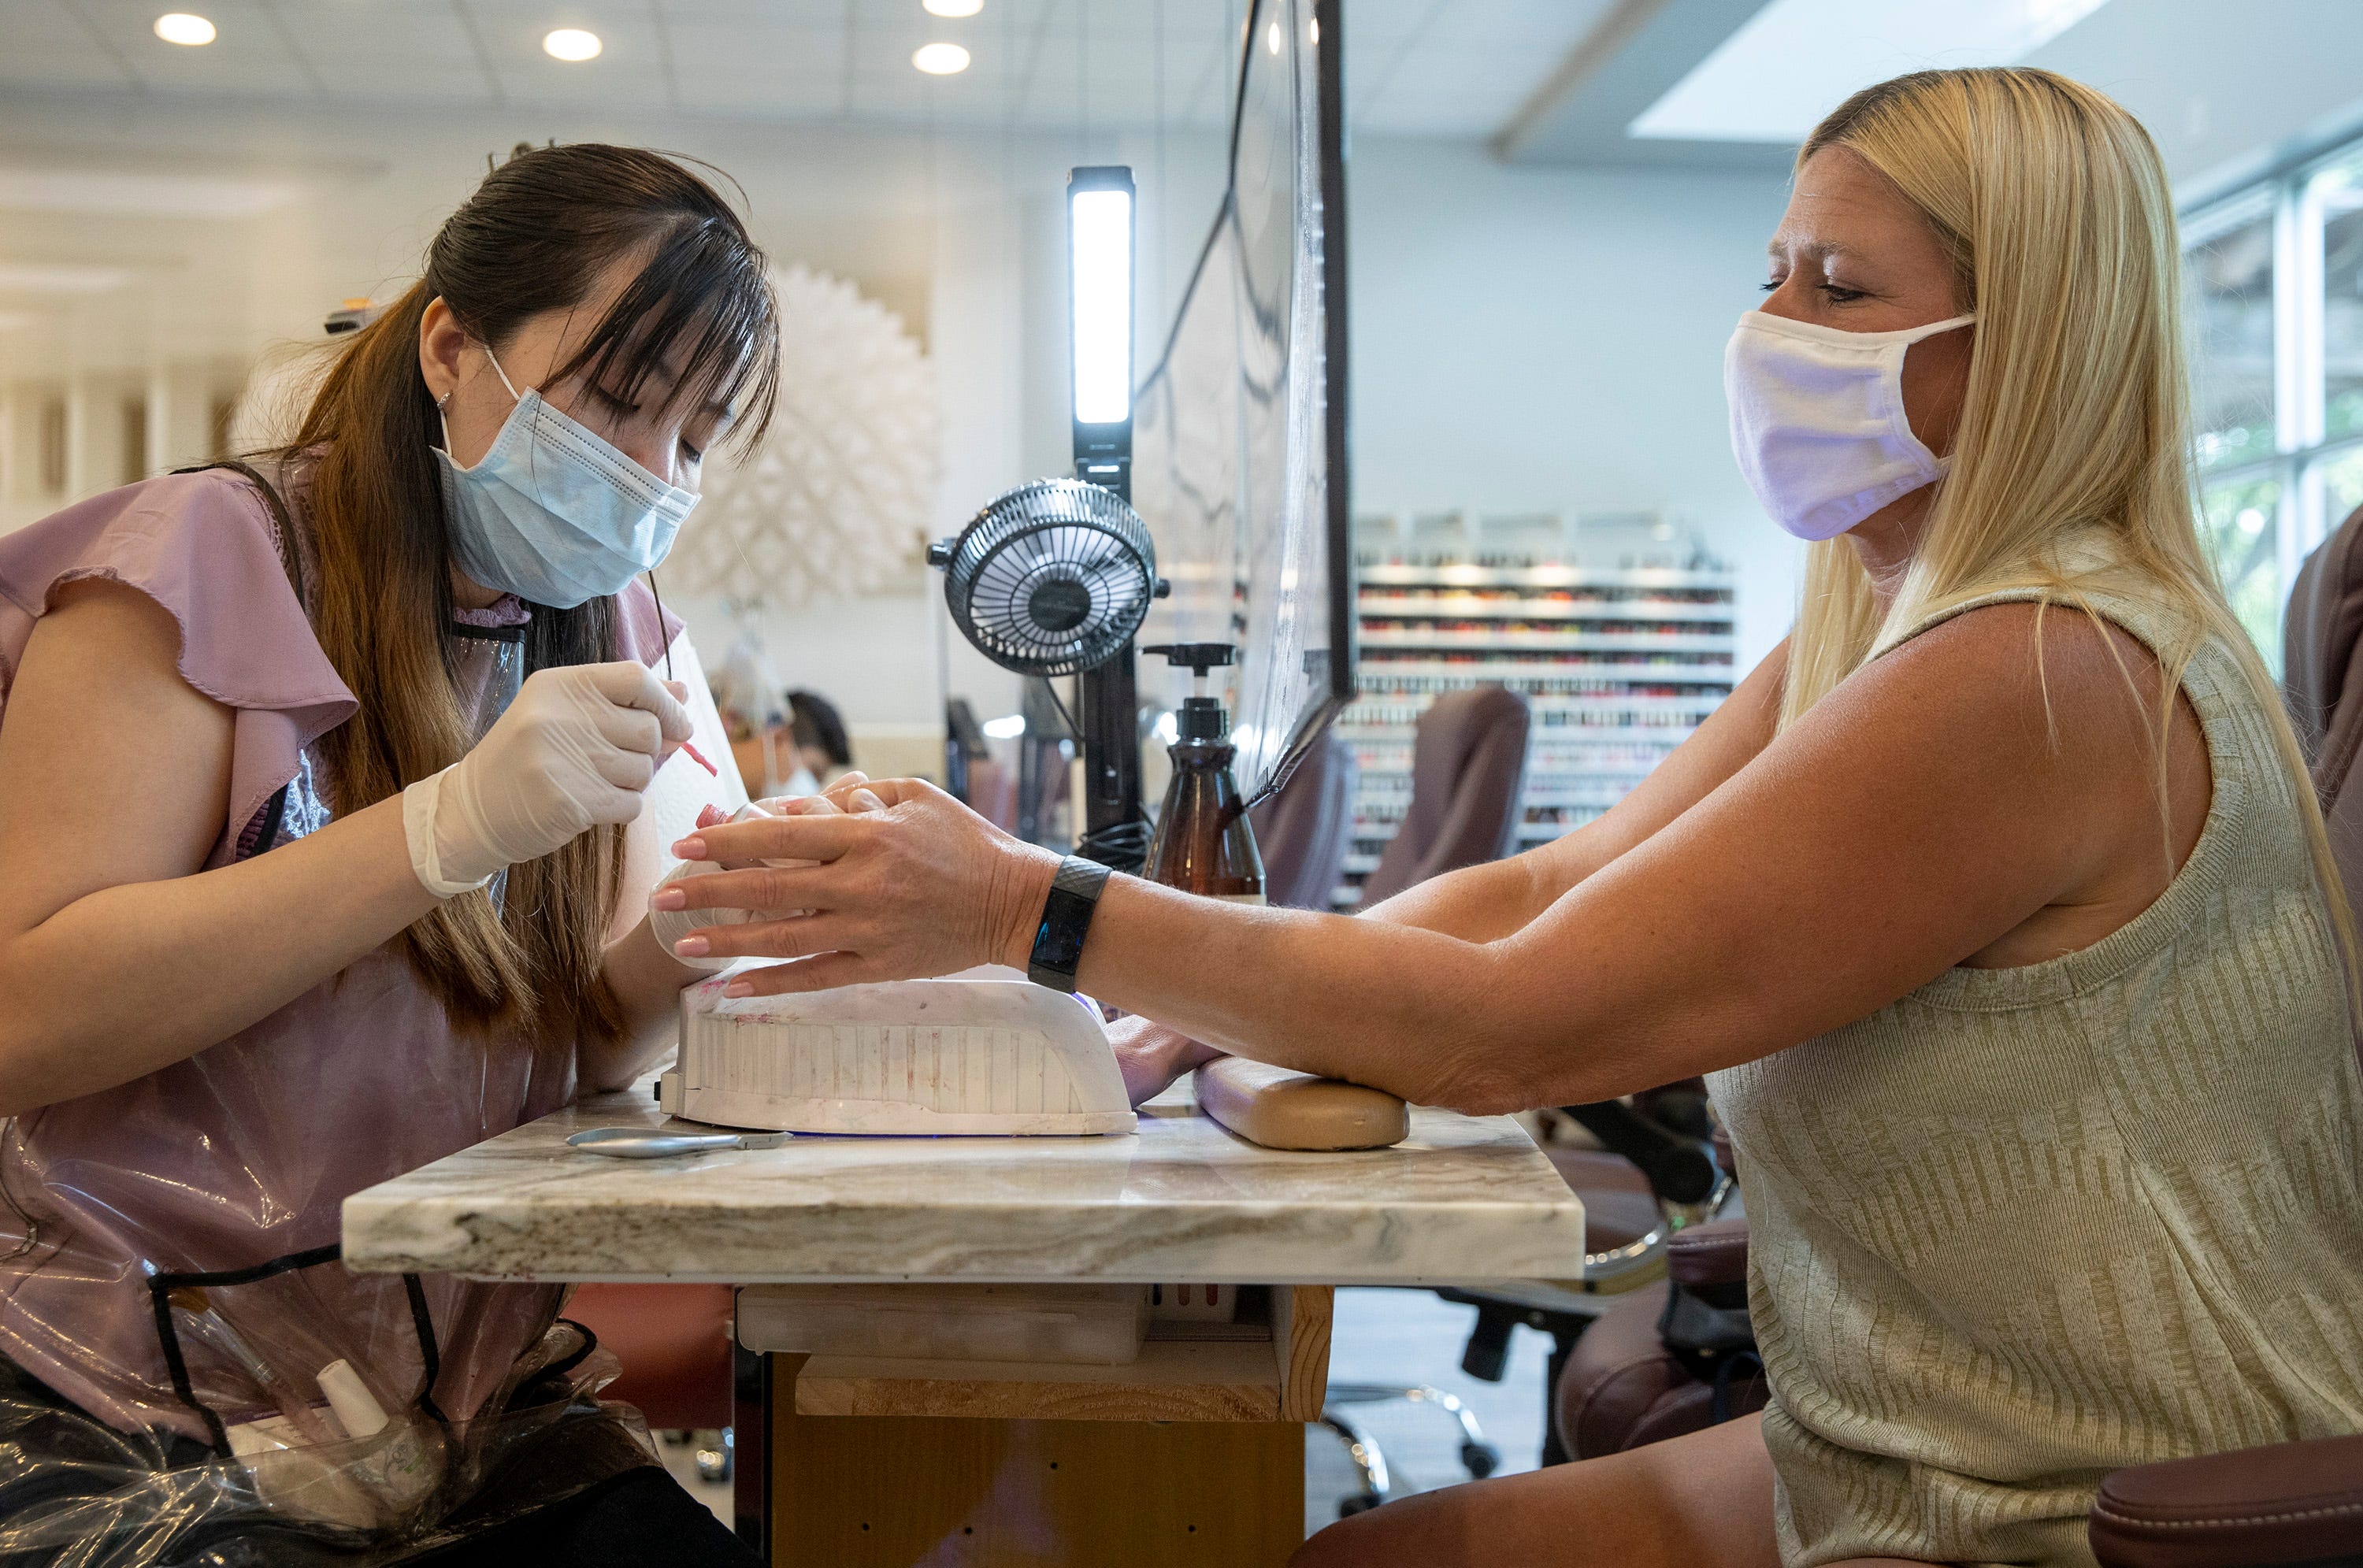 Shelley Pelton, right, gets a manicure from Lan Nguyen at Oasis Day Spa and Nails on West Slaughter Lane on Friday May 8, 2020.  Friday was the first day salons and barbershops were allowed to open after the coronavirus shut down.